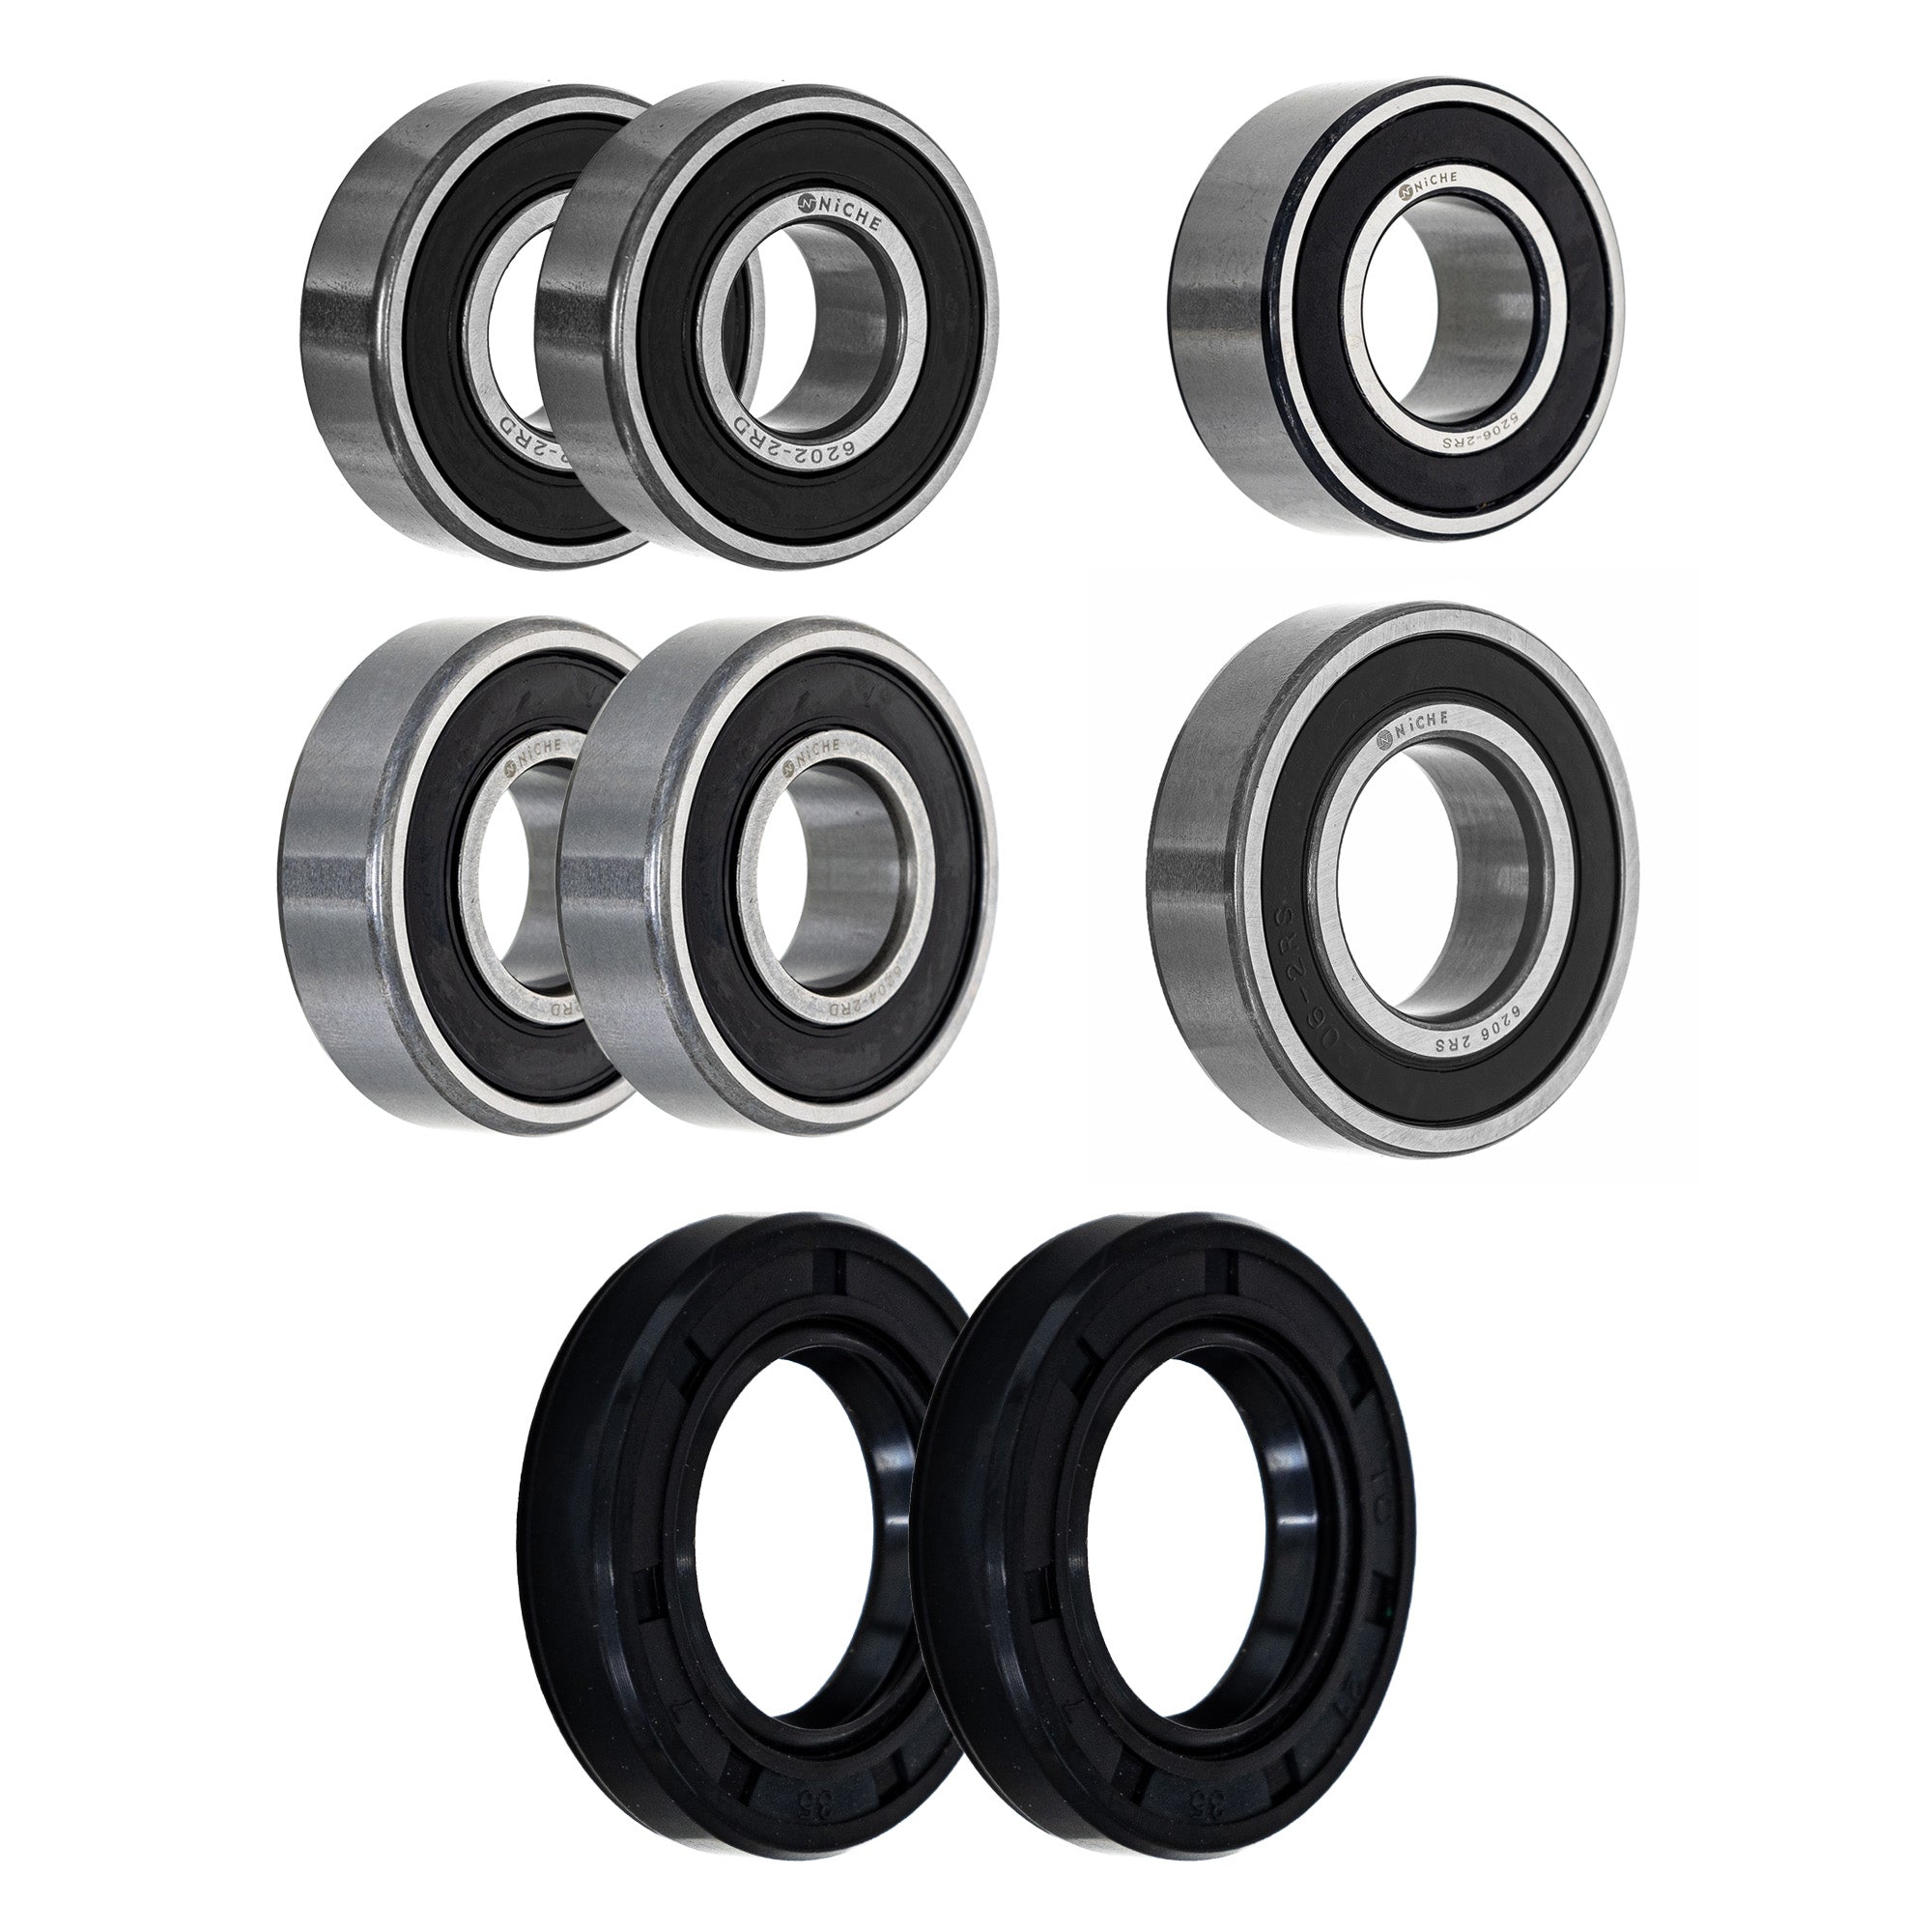 Wheel Bearing Seal Kit for zOTHER Ref No Shadow Ranger ACE NICHE MK1009244